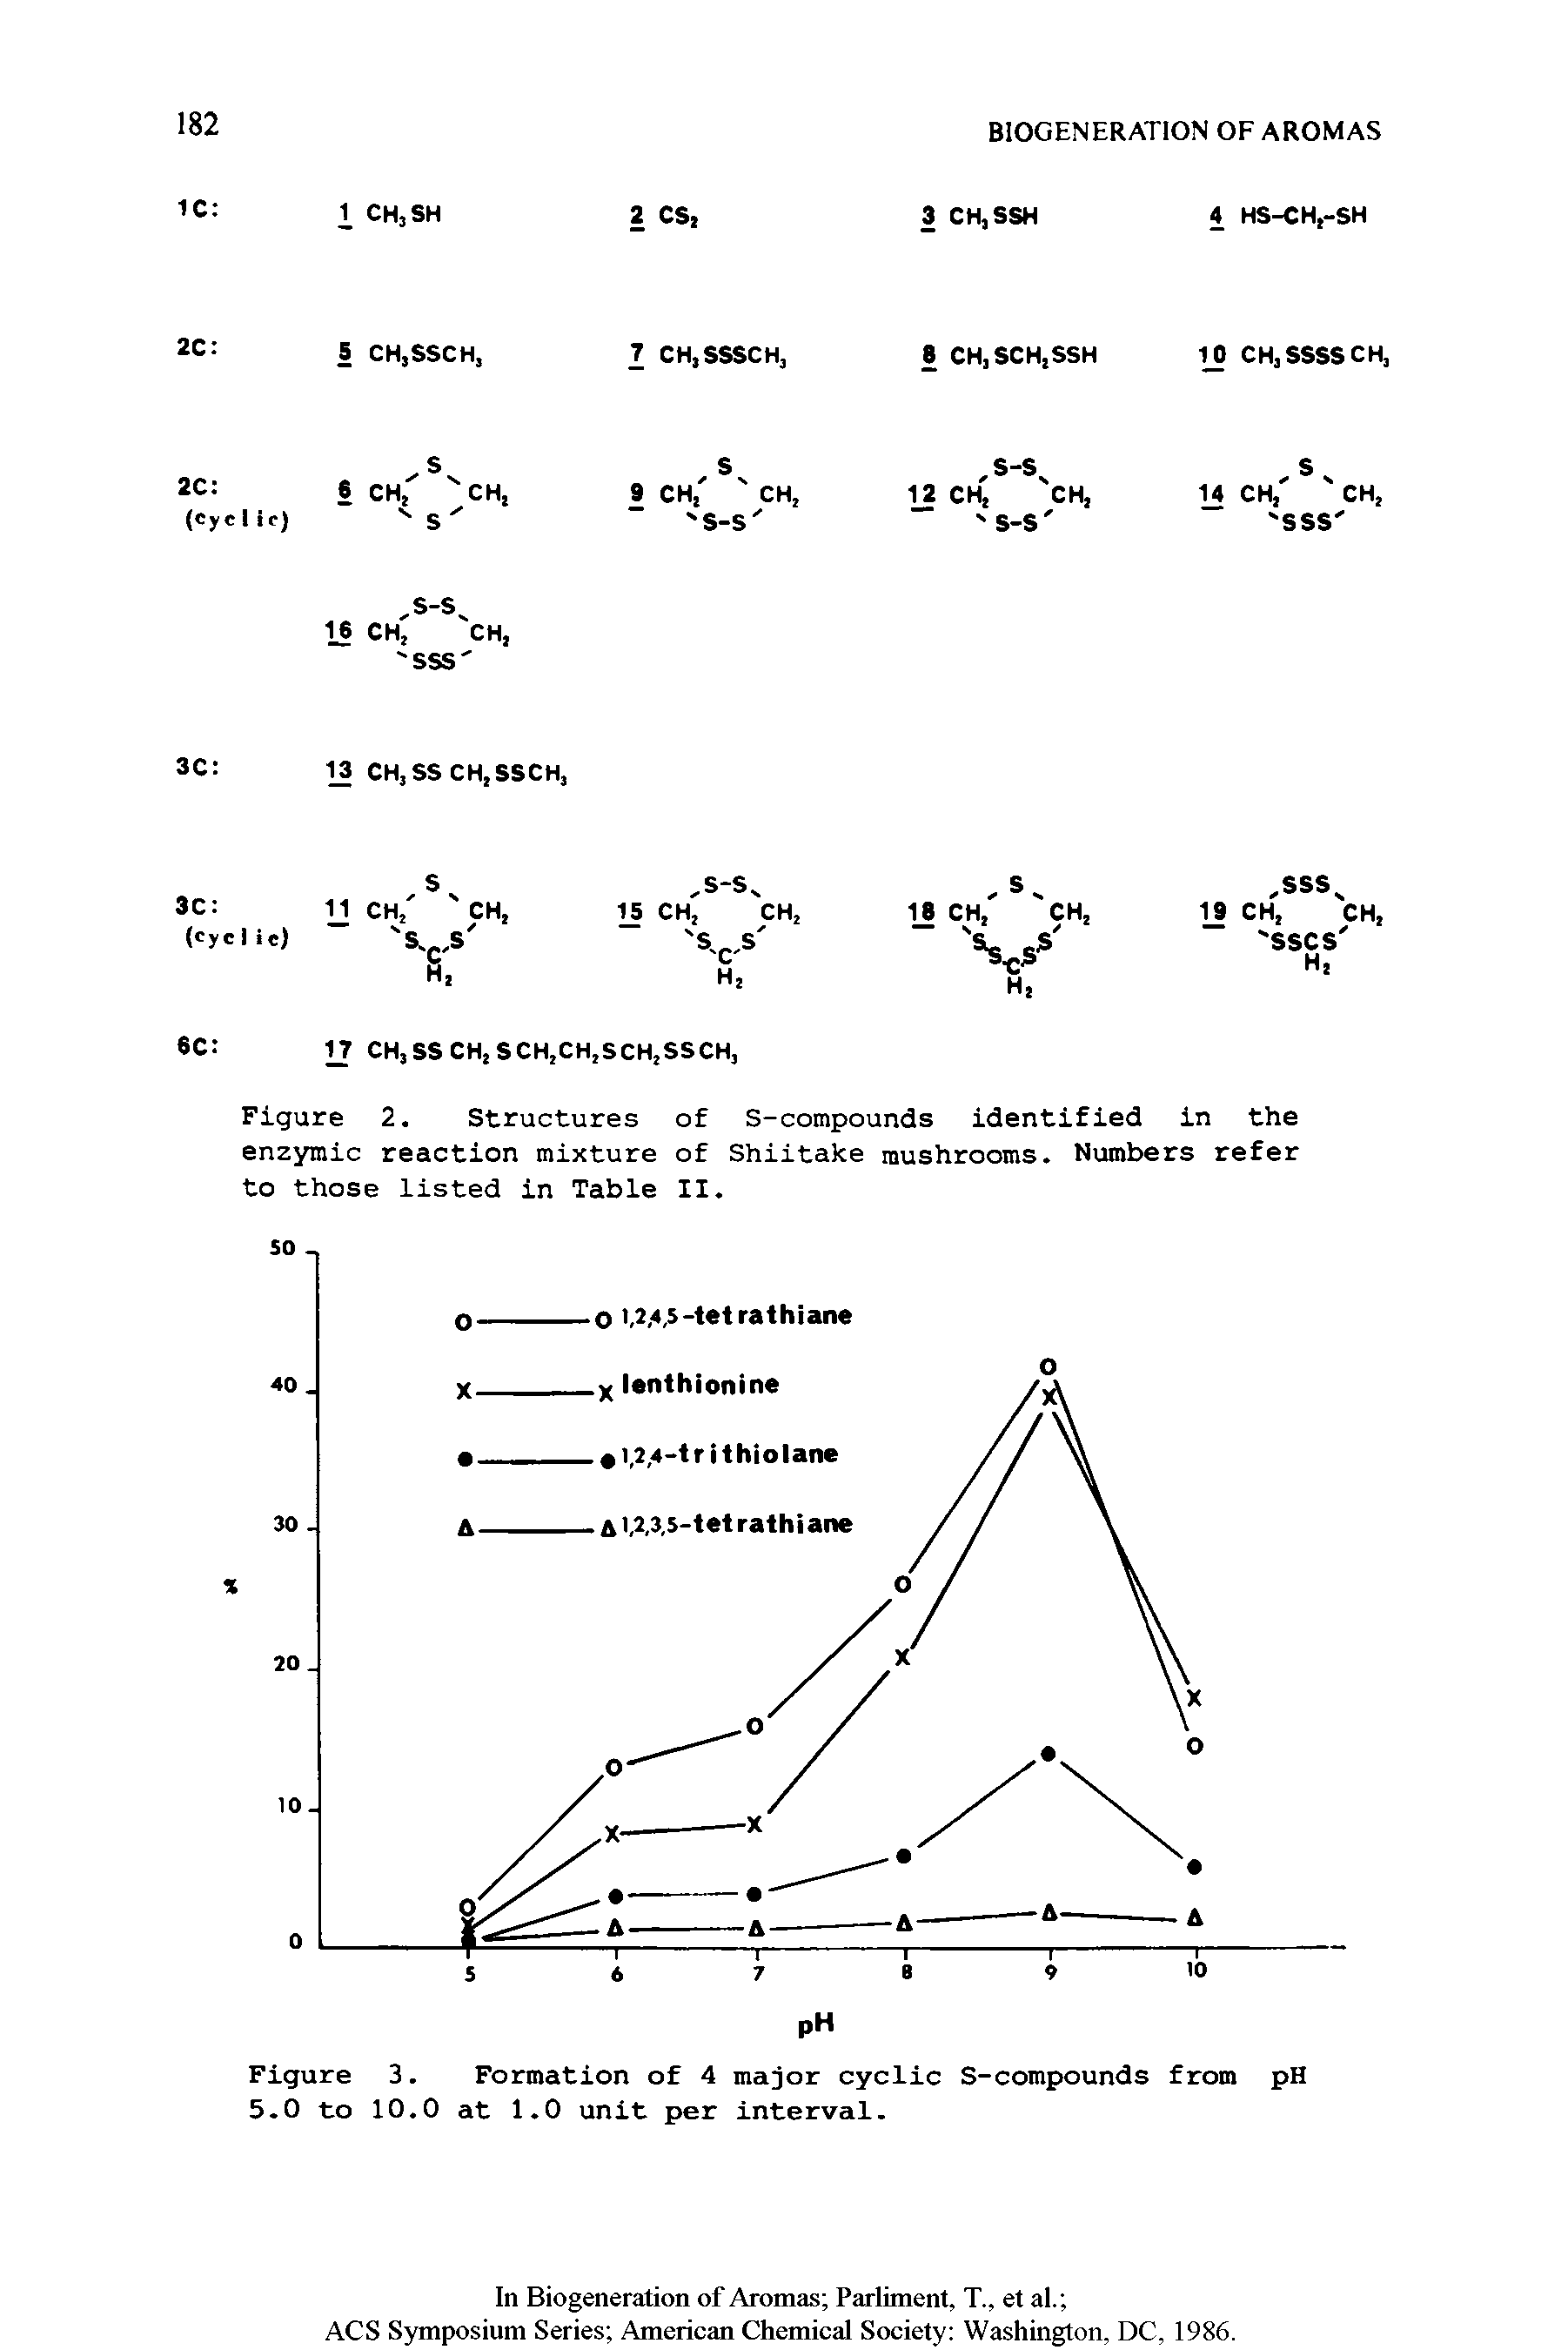 Figure 2. Structures of S-compounds identified in the enzymic reaction mixture of Shiitake mushrooms. Numbers refer to those listed in Table II.